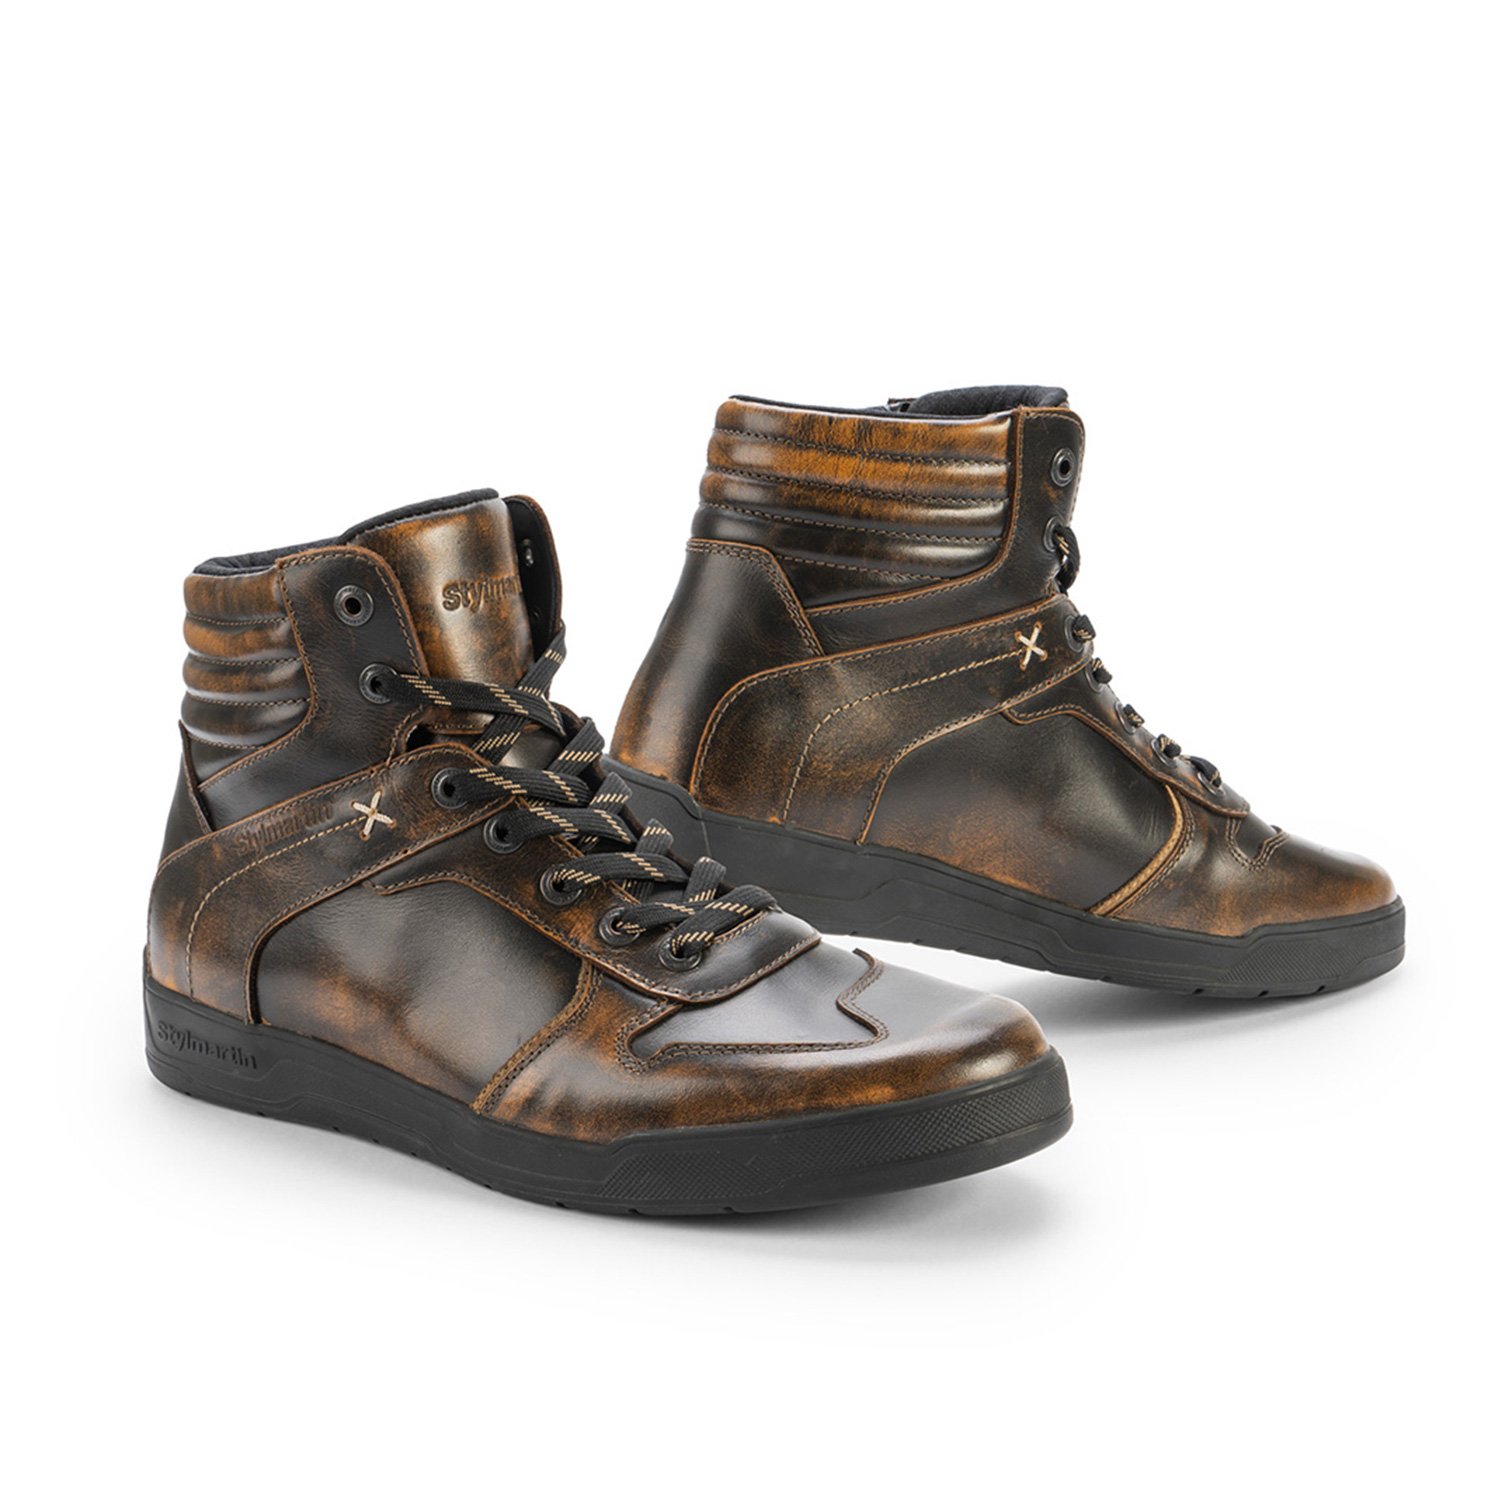 Image of Stylmartin Iron WP Bronze Sneakers Size 37 ID 1000001355467